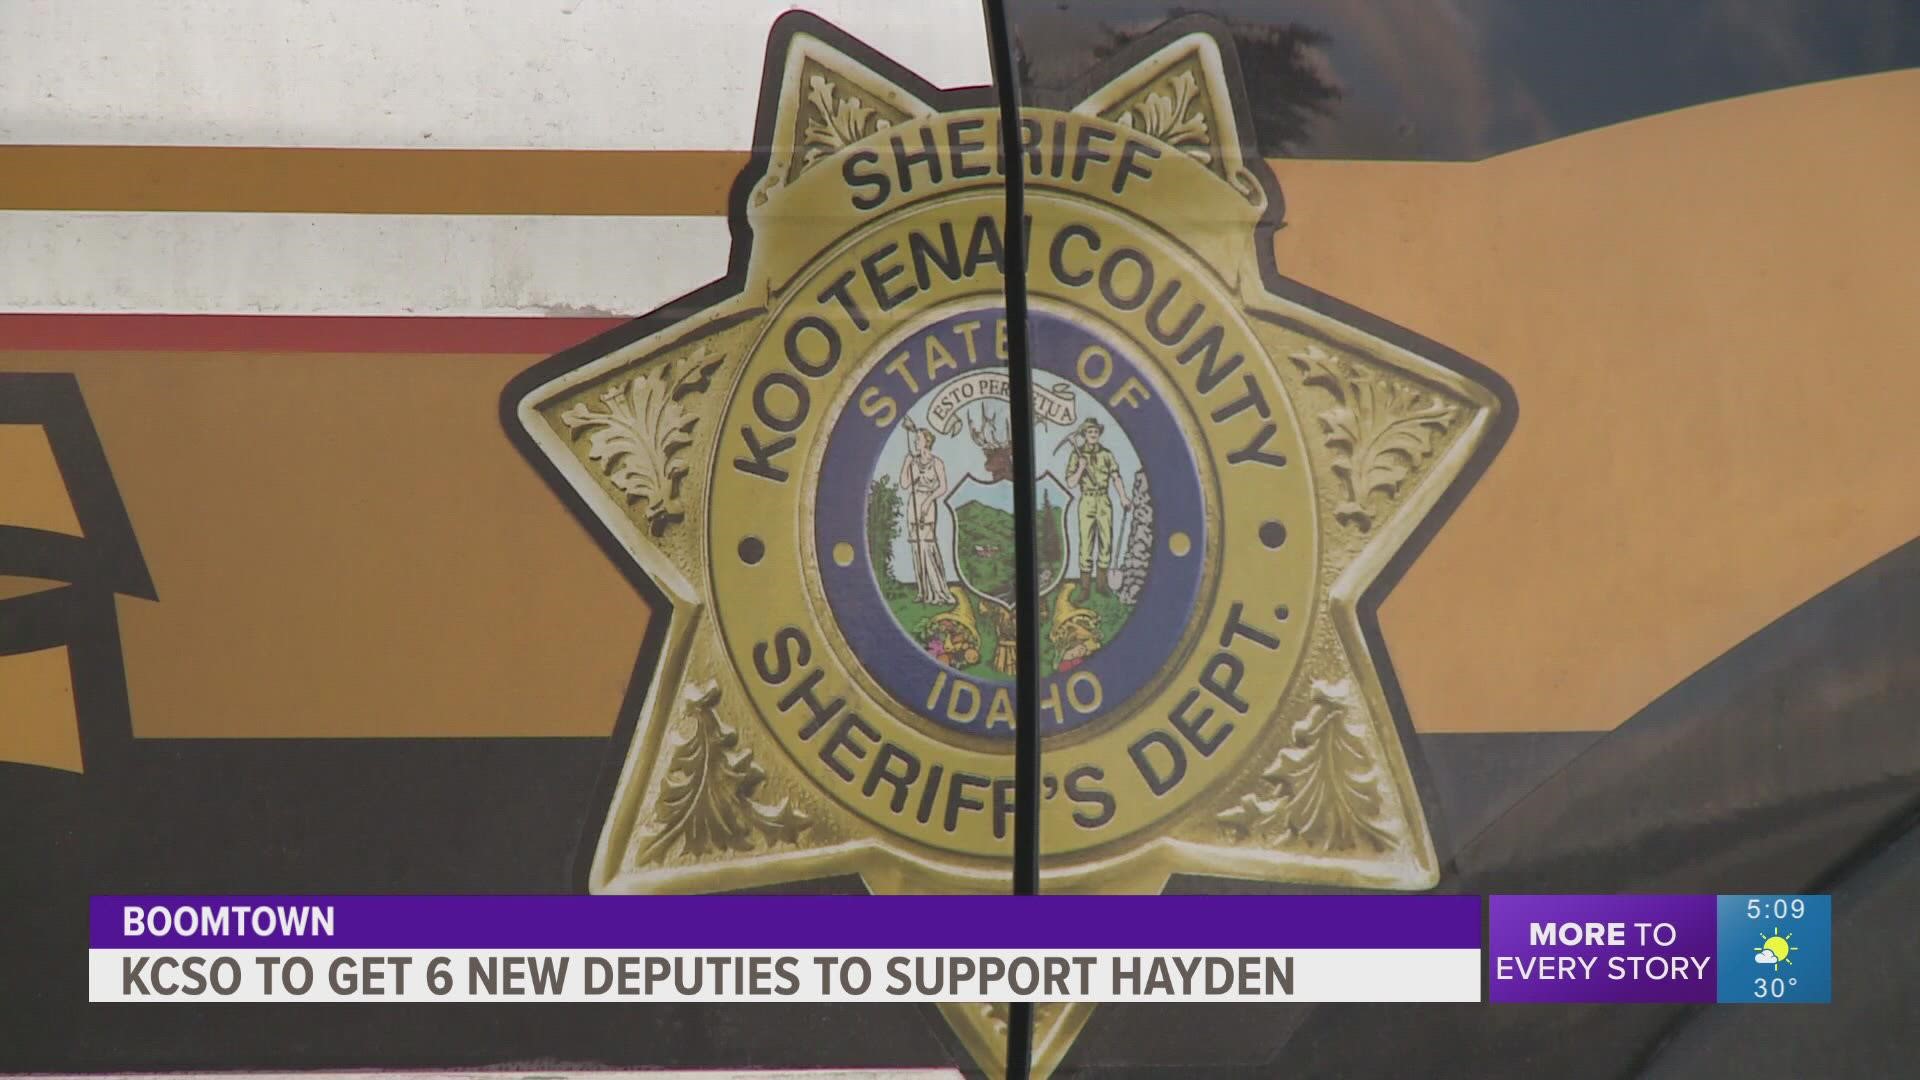 The Hayden budget will increase by $543,843 to cover an additional six sheriff's deputies assigned to Hayden.